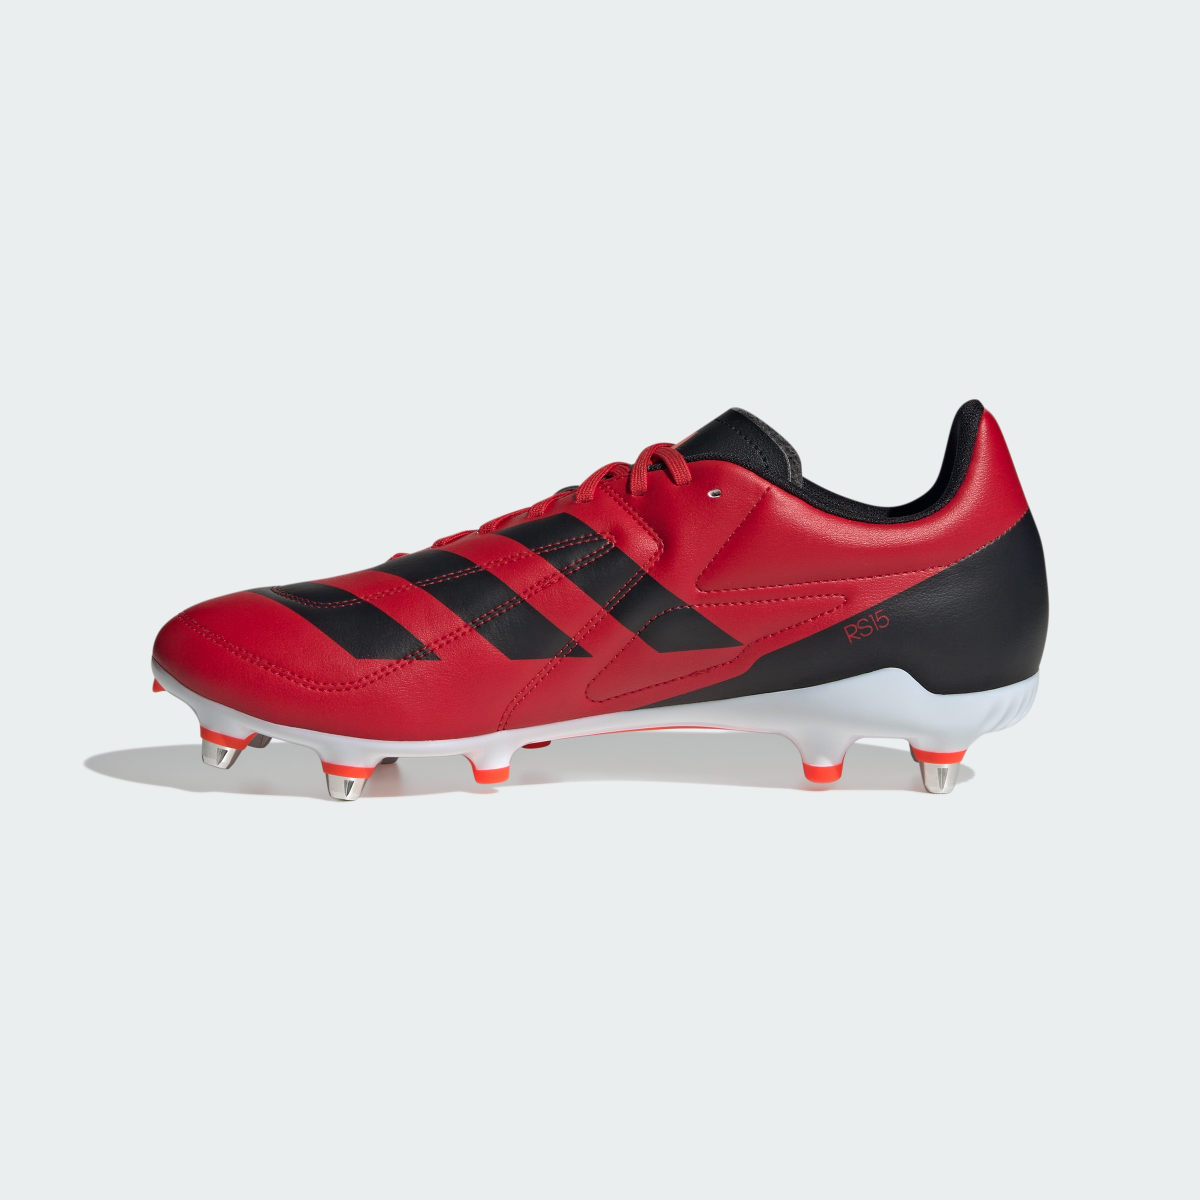 Adidas RS15 Soft Ground Rugby Boots. 7